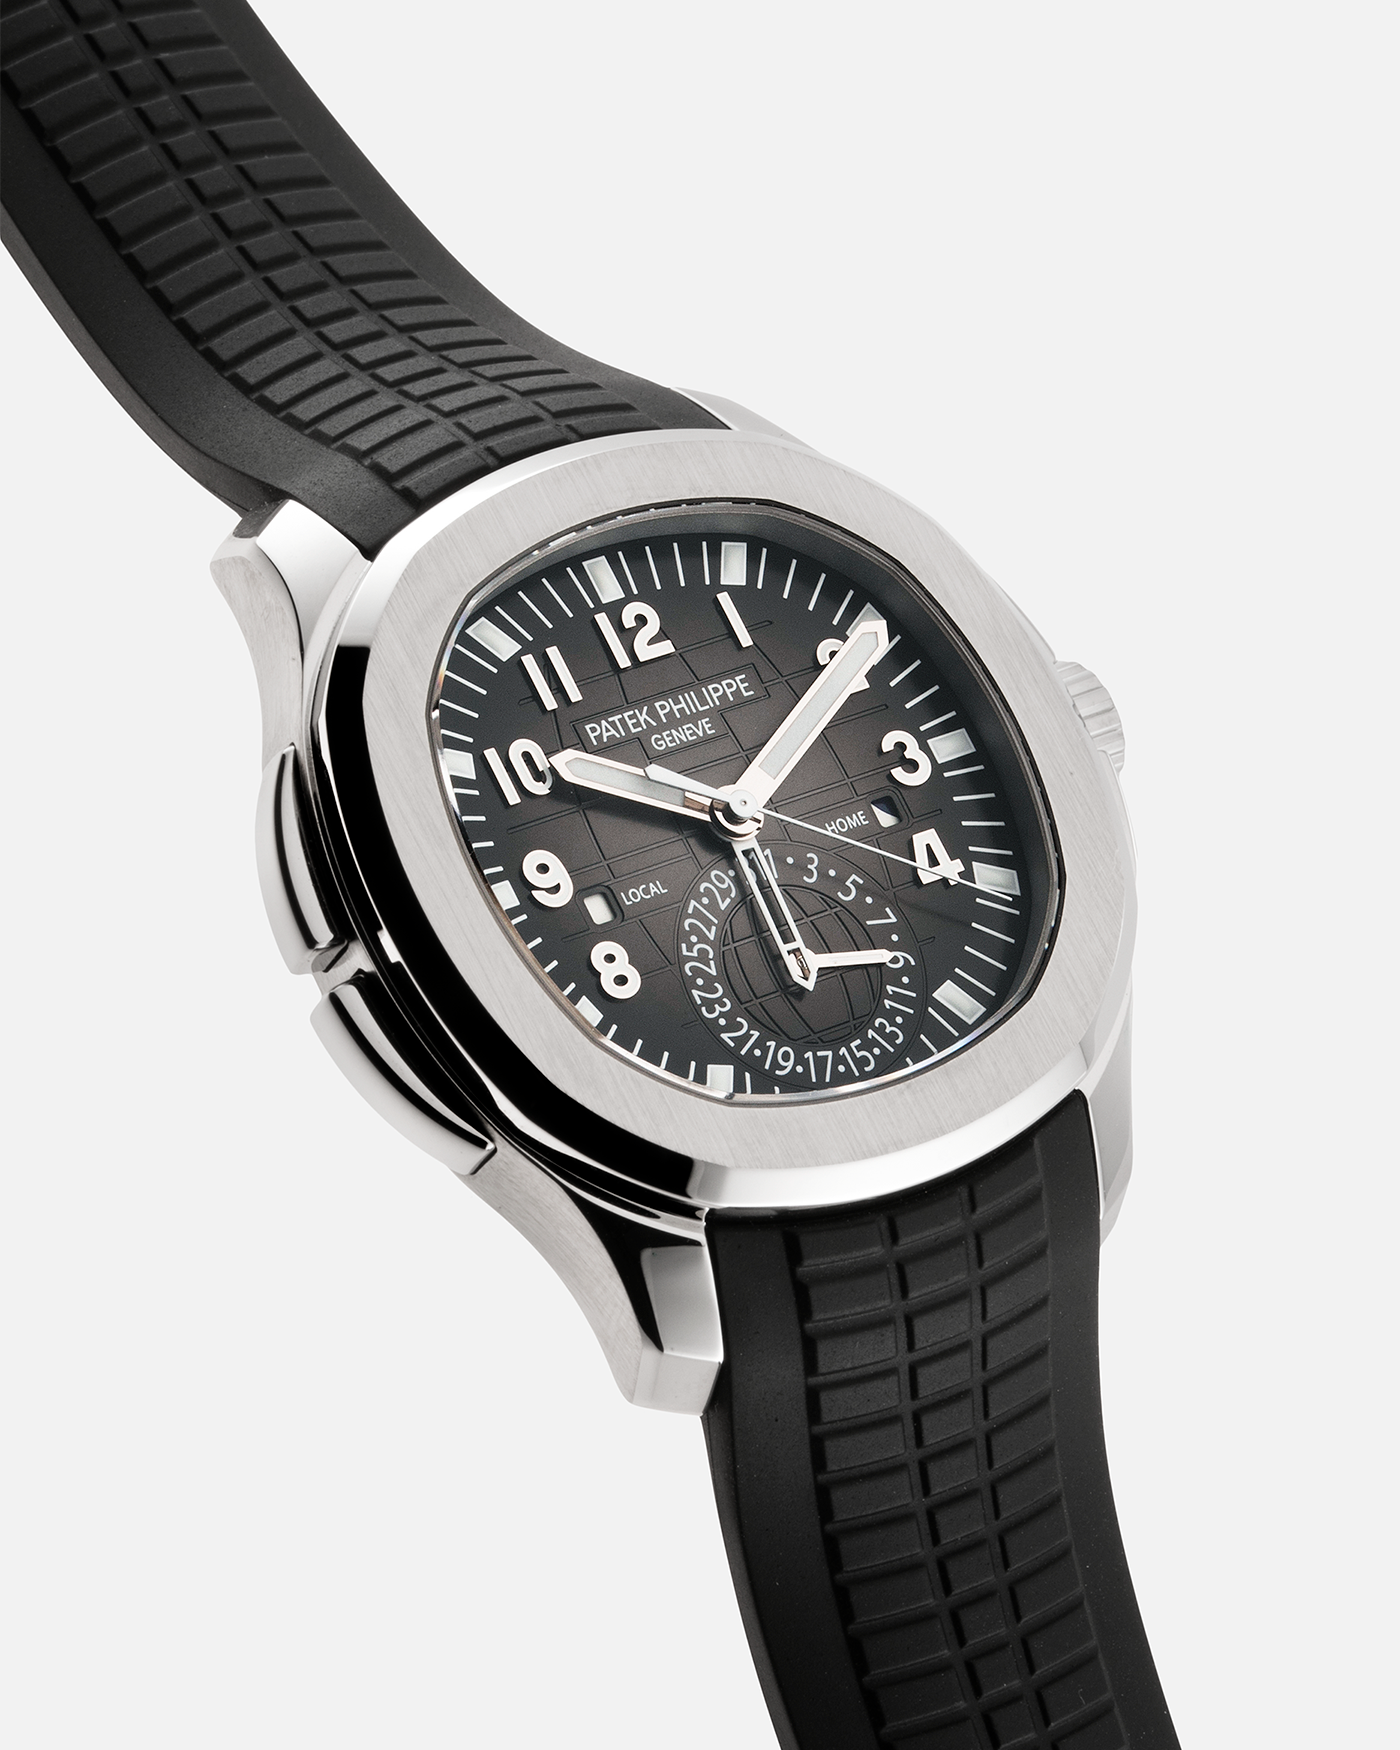 Brand: Patek Philippe Year: 2021 Model: Aquanaut Reference Number: 5164A Material: Stainless Steel Movement: Calibre 324 C FUS Case Diameter: 40.8mm Bracelet: Uncut Patek Philippe Aquanaut Black Tropical Rubber Strap with Signed Deployant Clasp